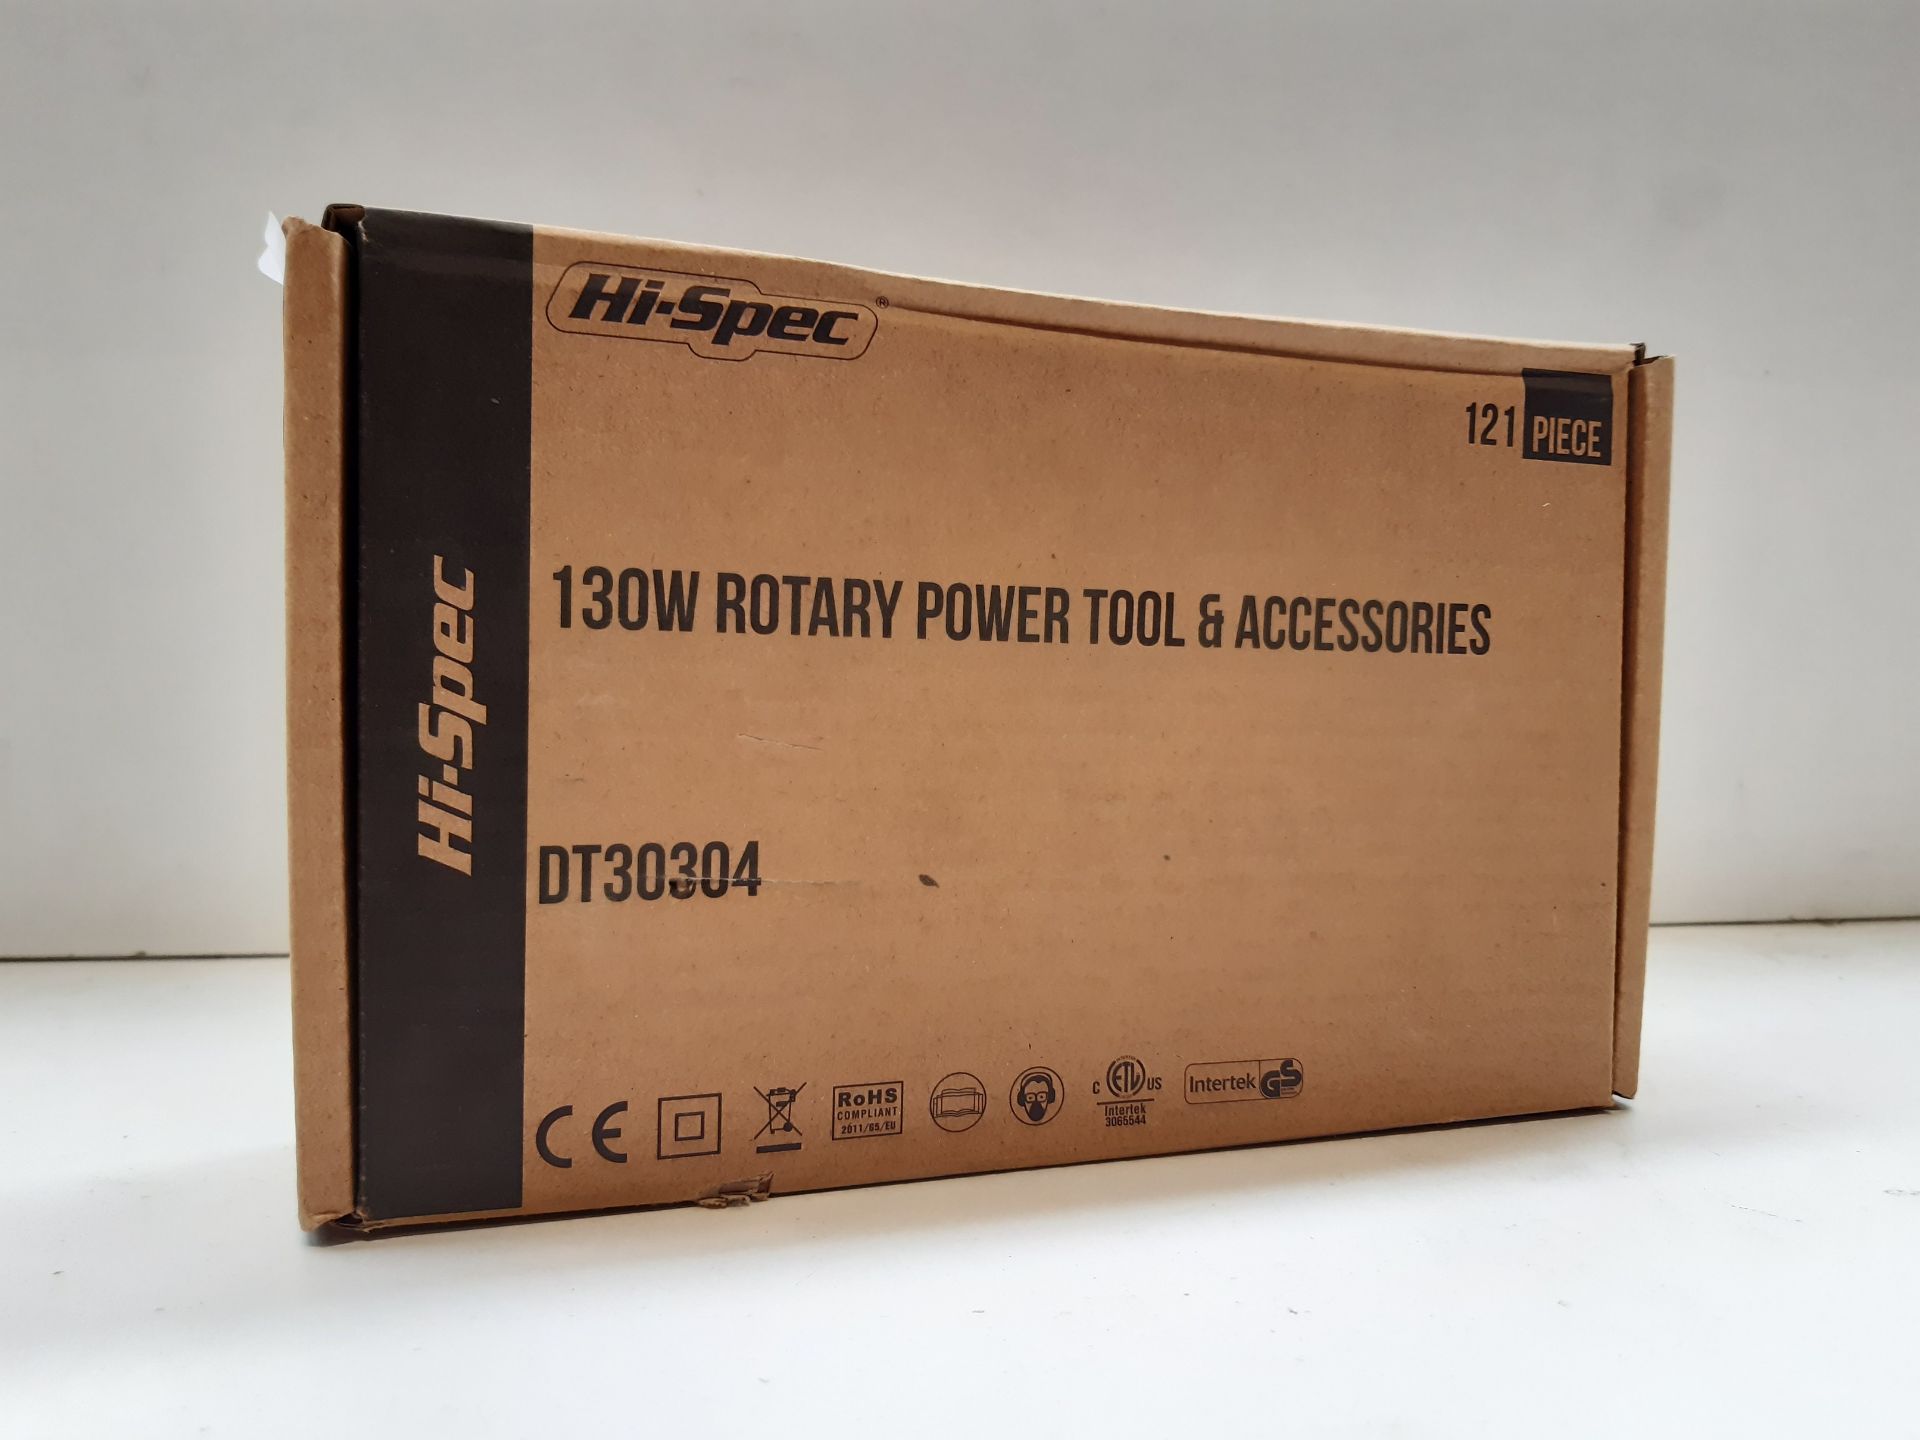 RRP £28.99 Hi-Spec 121 Piece 130W Corded Rotary Power Tool Kit - Image 2 of 2